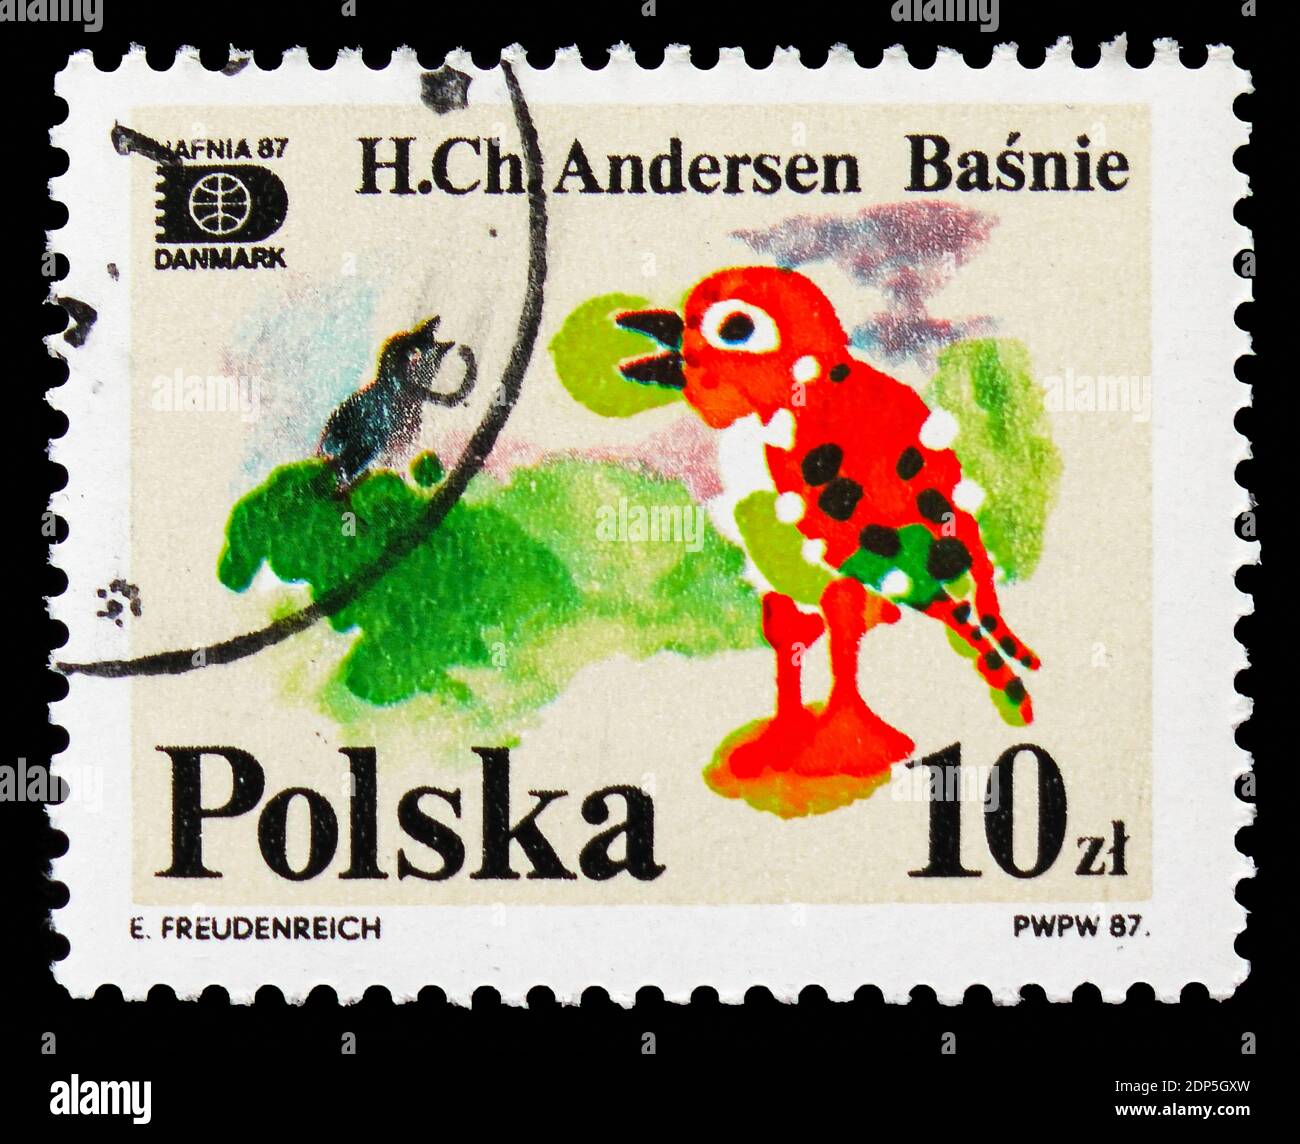 MOSCOW, RUSSIA - SEPTEMBER 15, 2018: A stamp printed in Poland shows The Nightingale, HAFNIA '87, Fairy Tales By H.C.Andersen (1805-1875)serie, circa Stock Photo